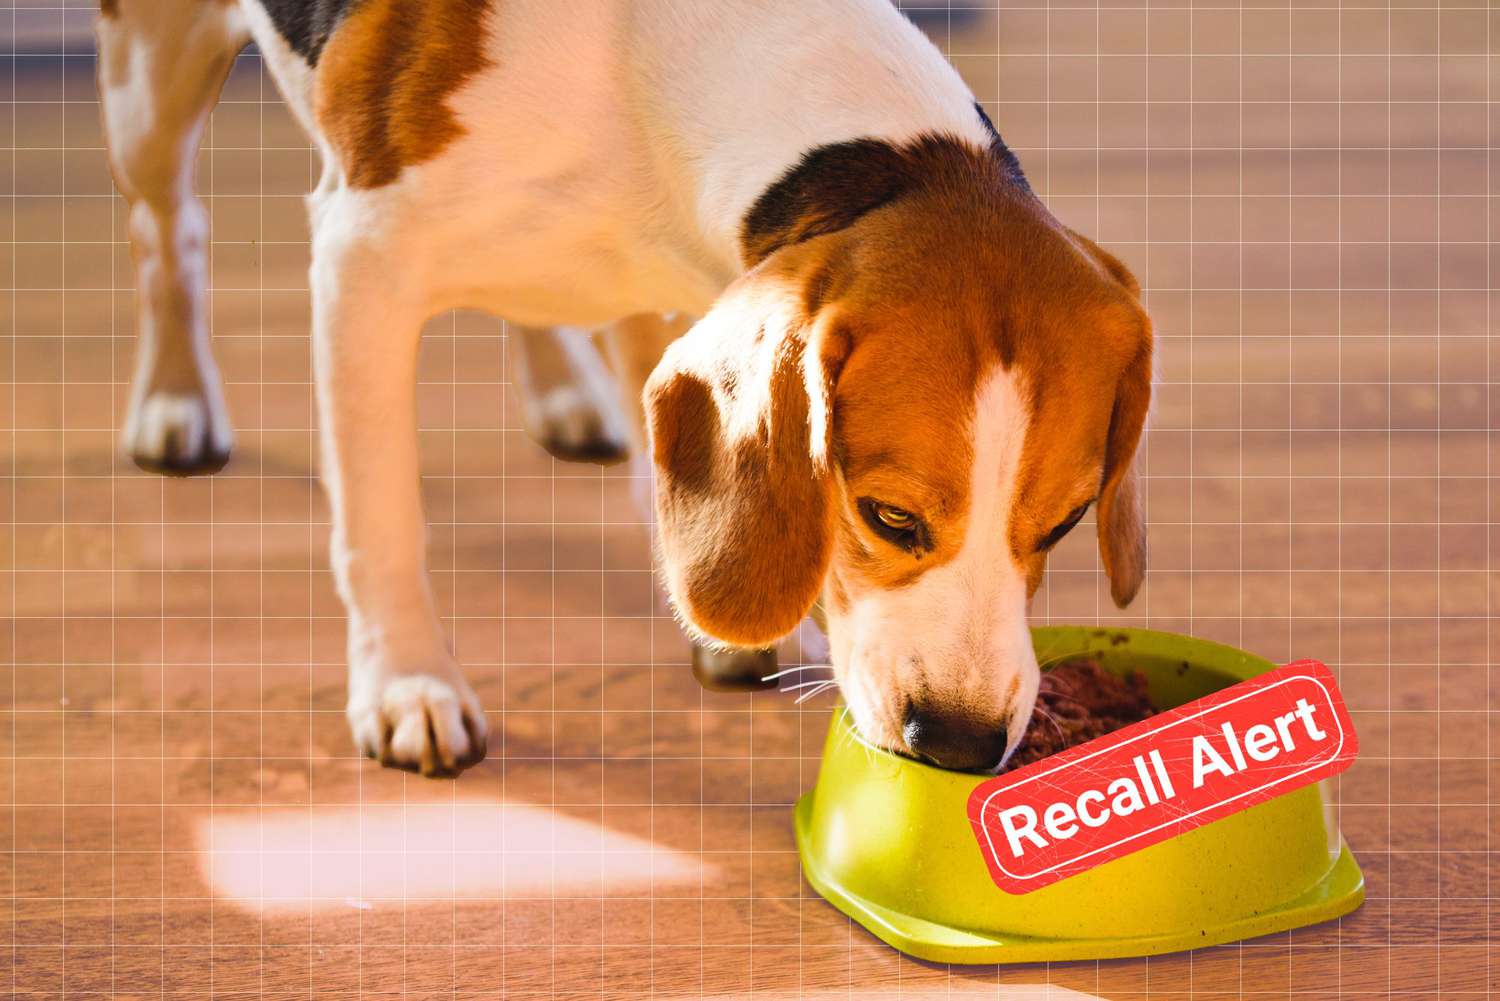 dog eating from a dog food bowl with a Recall Alert sign on it, on designed background